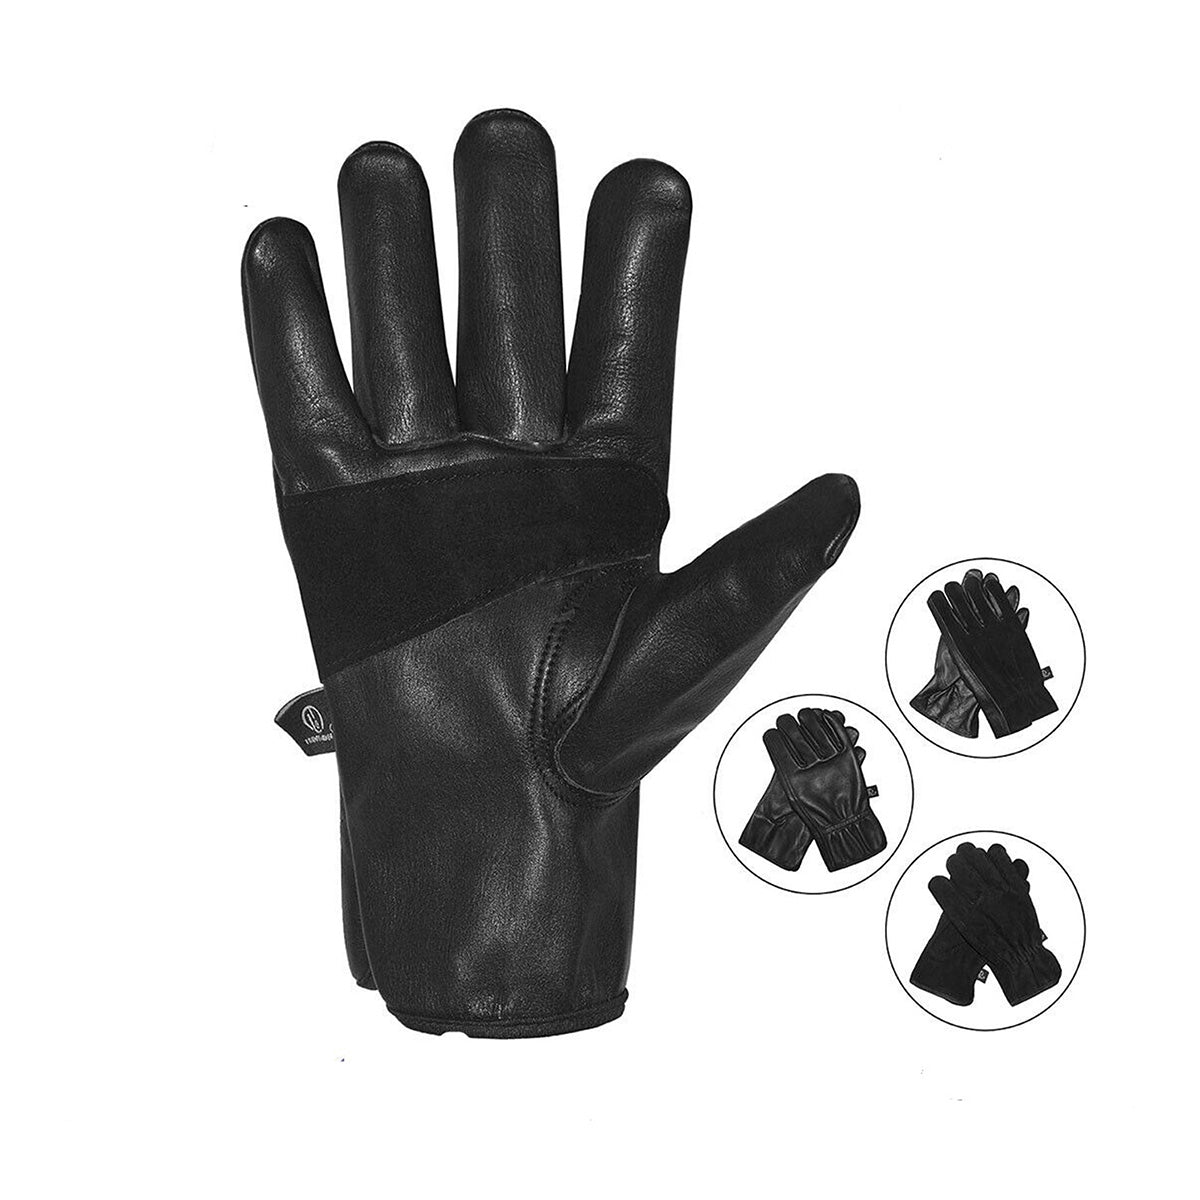 Leather Work Gloves Heavy Duty Top Grain Cowhide Suede Multipurpose Touchscreen